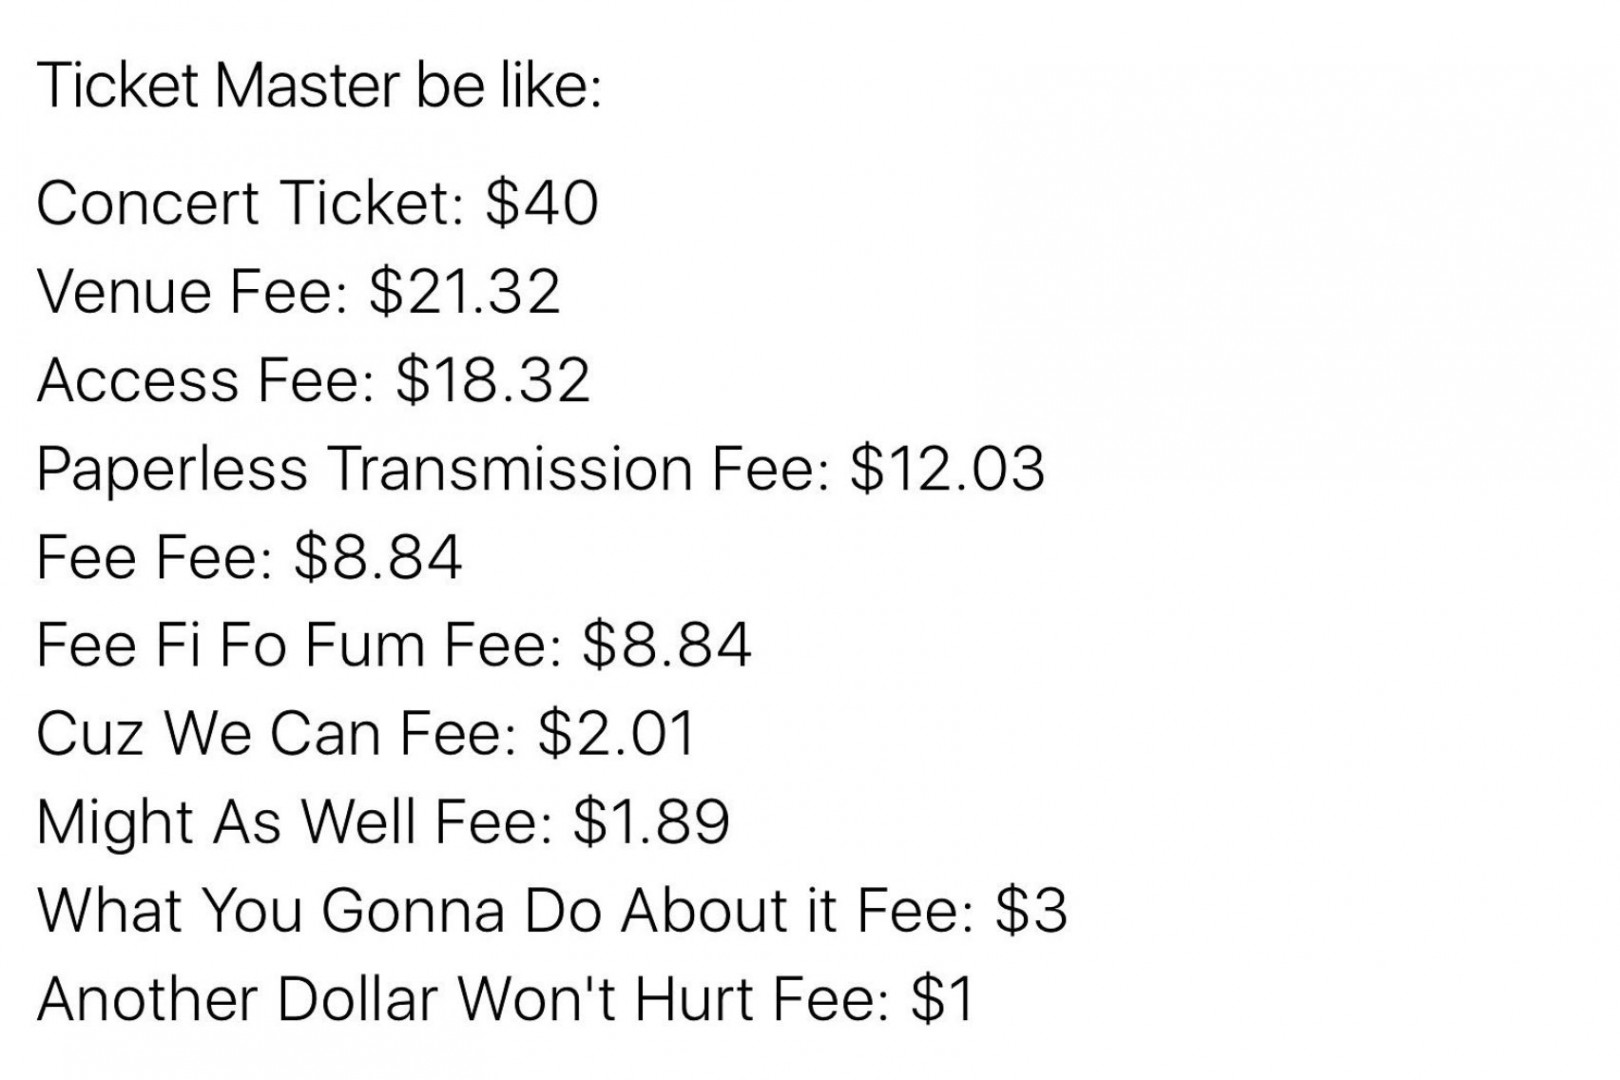 Cure demands Ticketmaster not use dynamic pricing, Ticketmaster then doubles processing fees